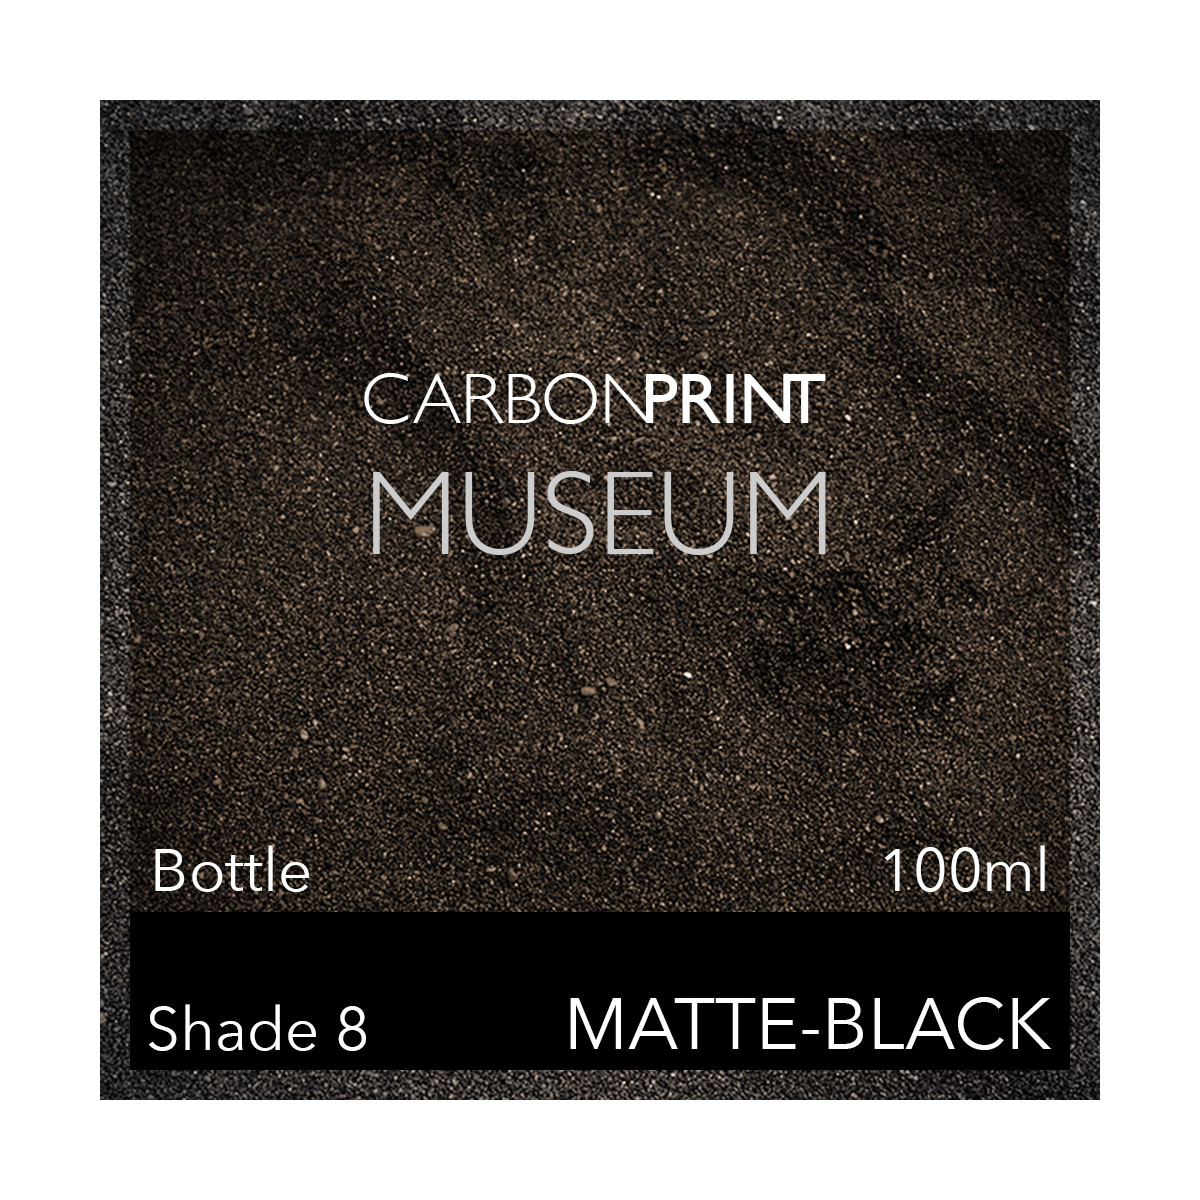 Carbonprint Museum Shade8 Channel MK 100ml